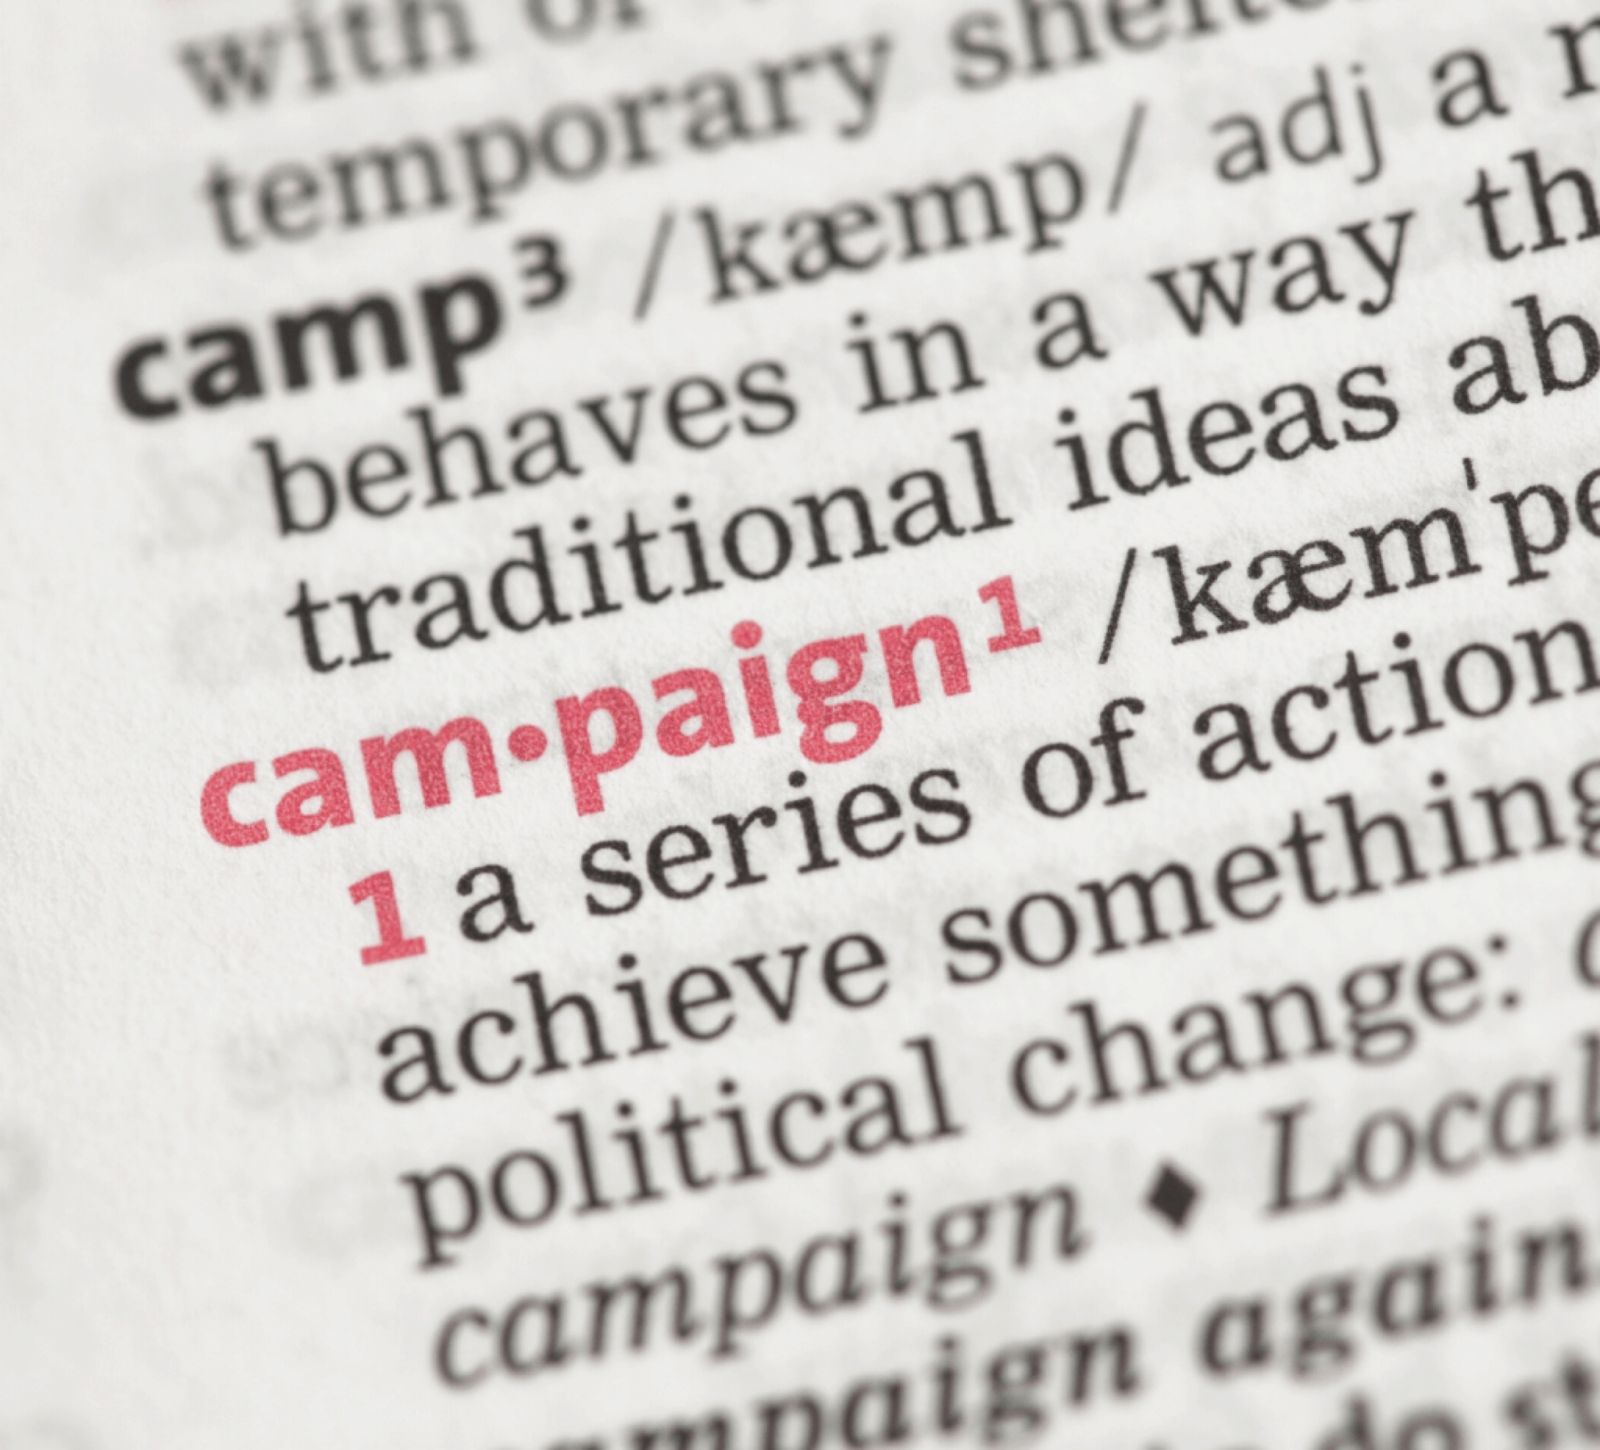 Kitchen Table CEOs Blog - 3 types of email campaigns for your small business - kitchen table ceos - blog post - by tracy smith - image of campaign dictionary definition